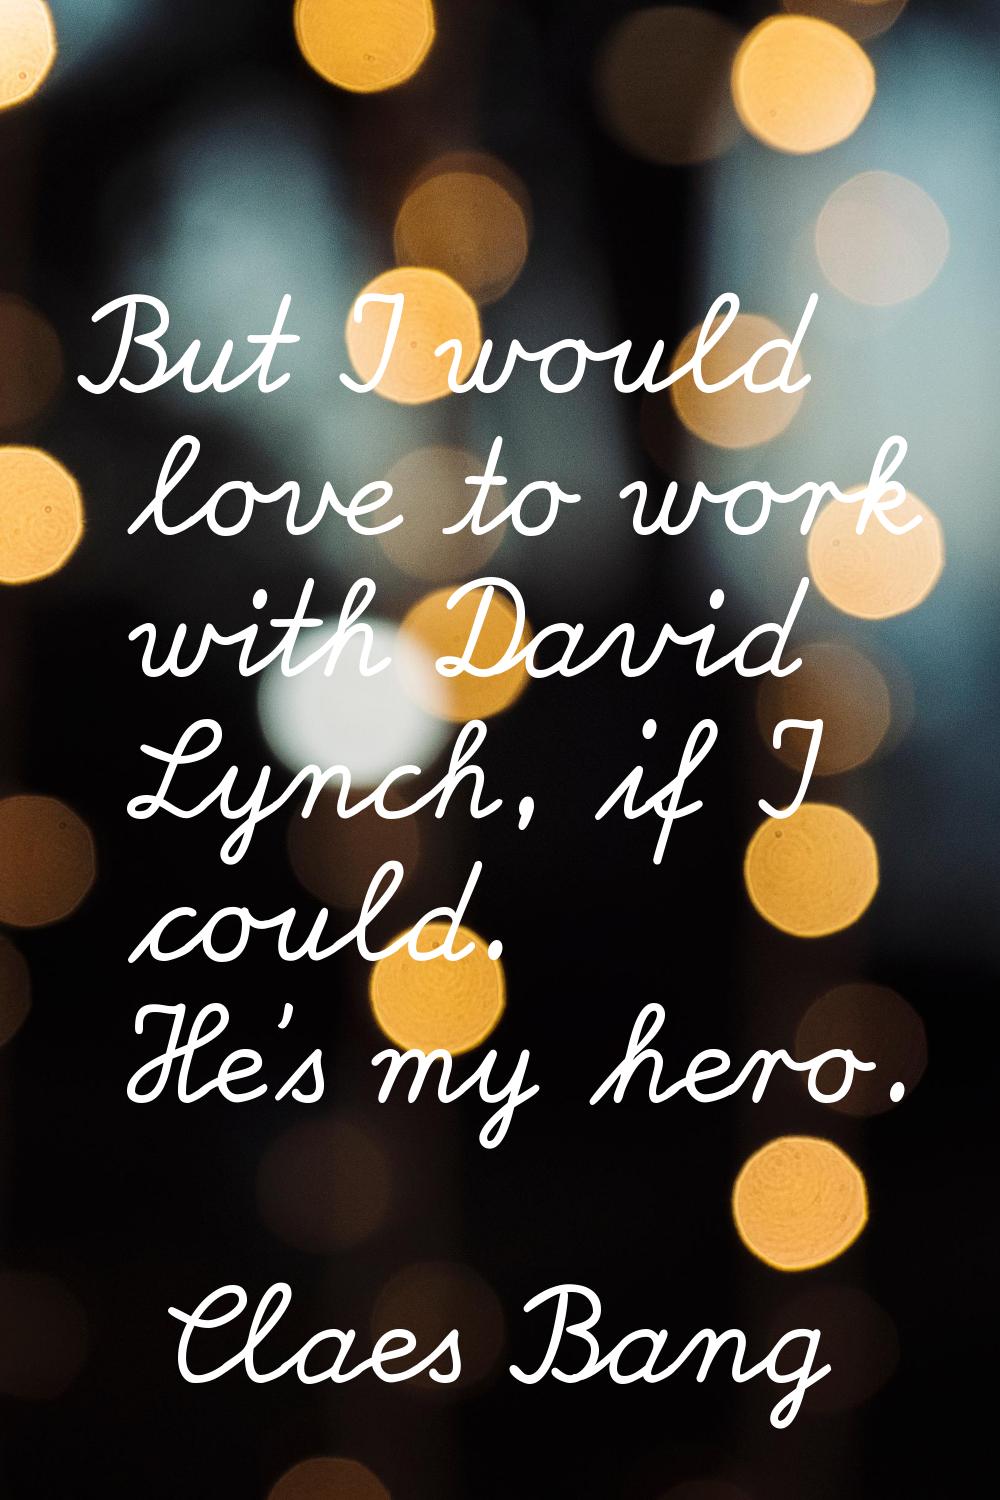 But I would love to work with David Lynch, if I could. He's my hero.